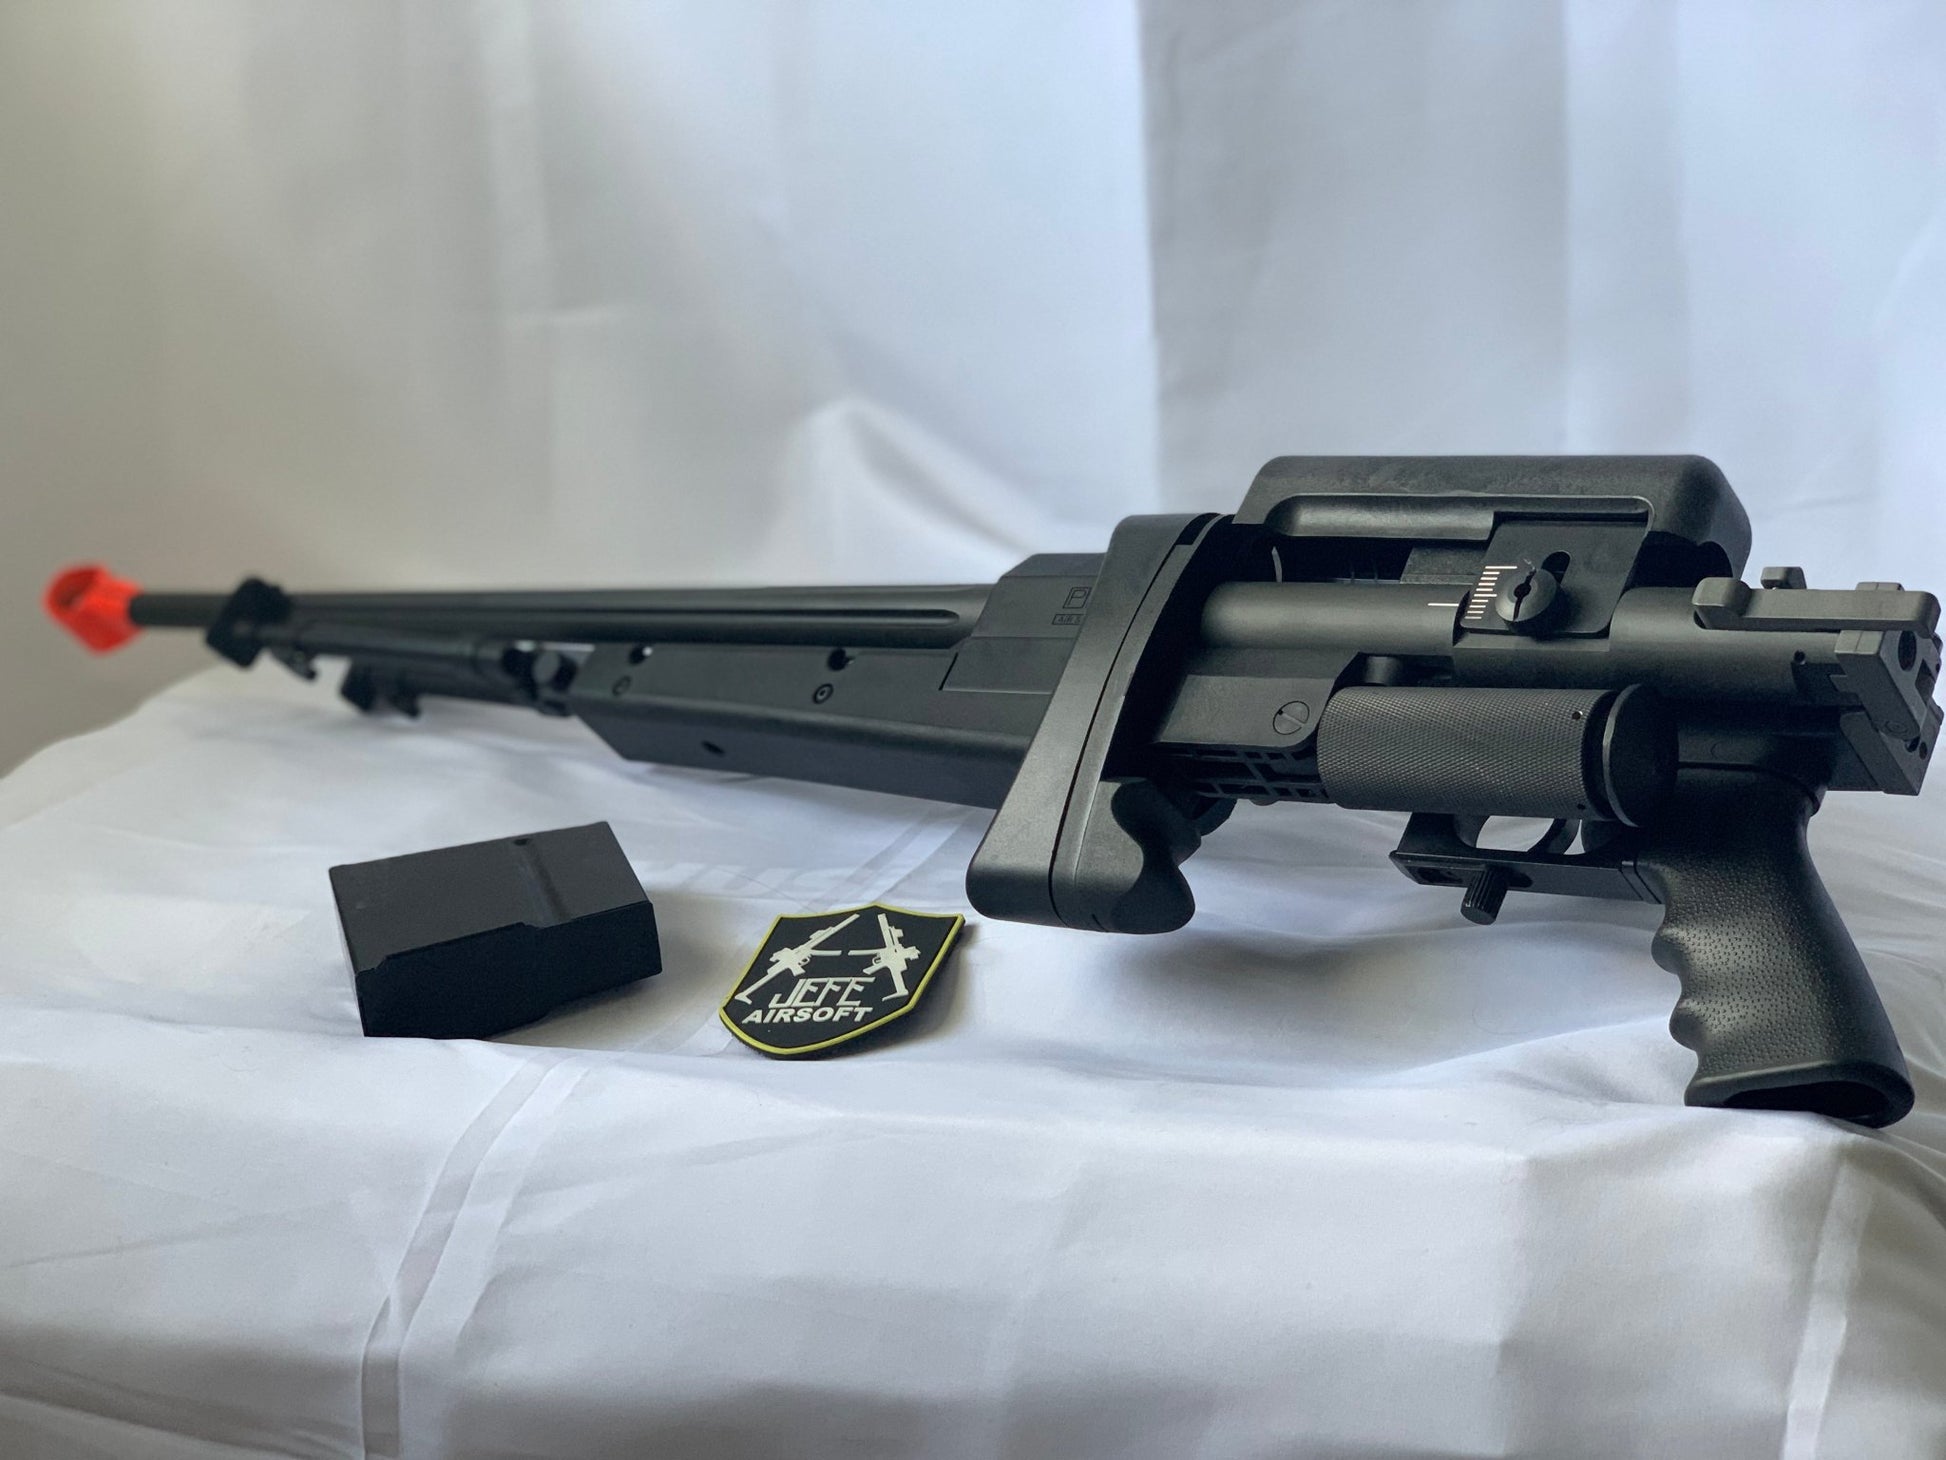 PGM Gas Powered - Jefe's Airsoft Solutionsblackdevicegreen gas